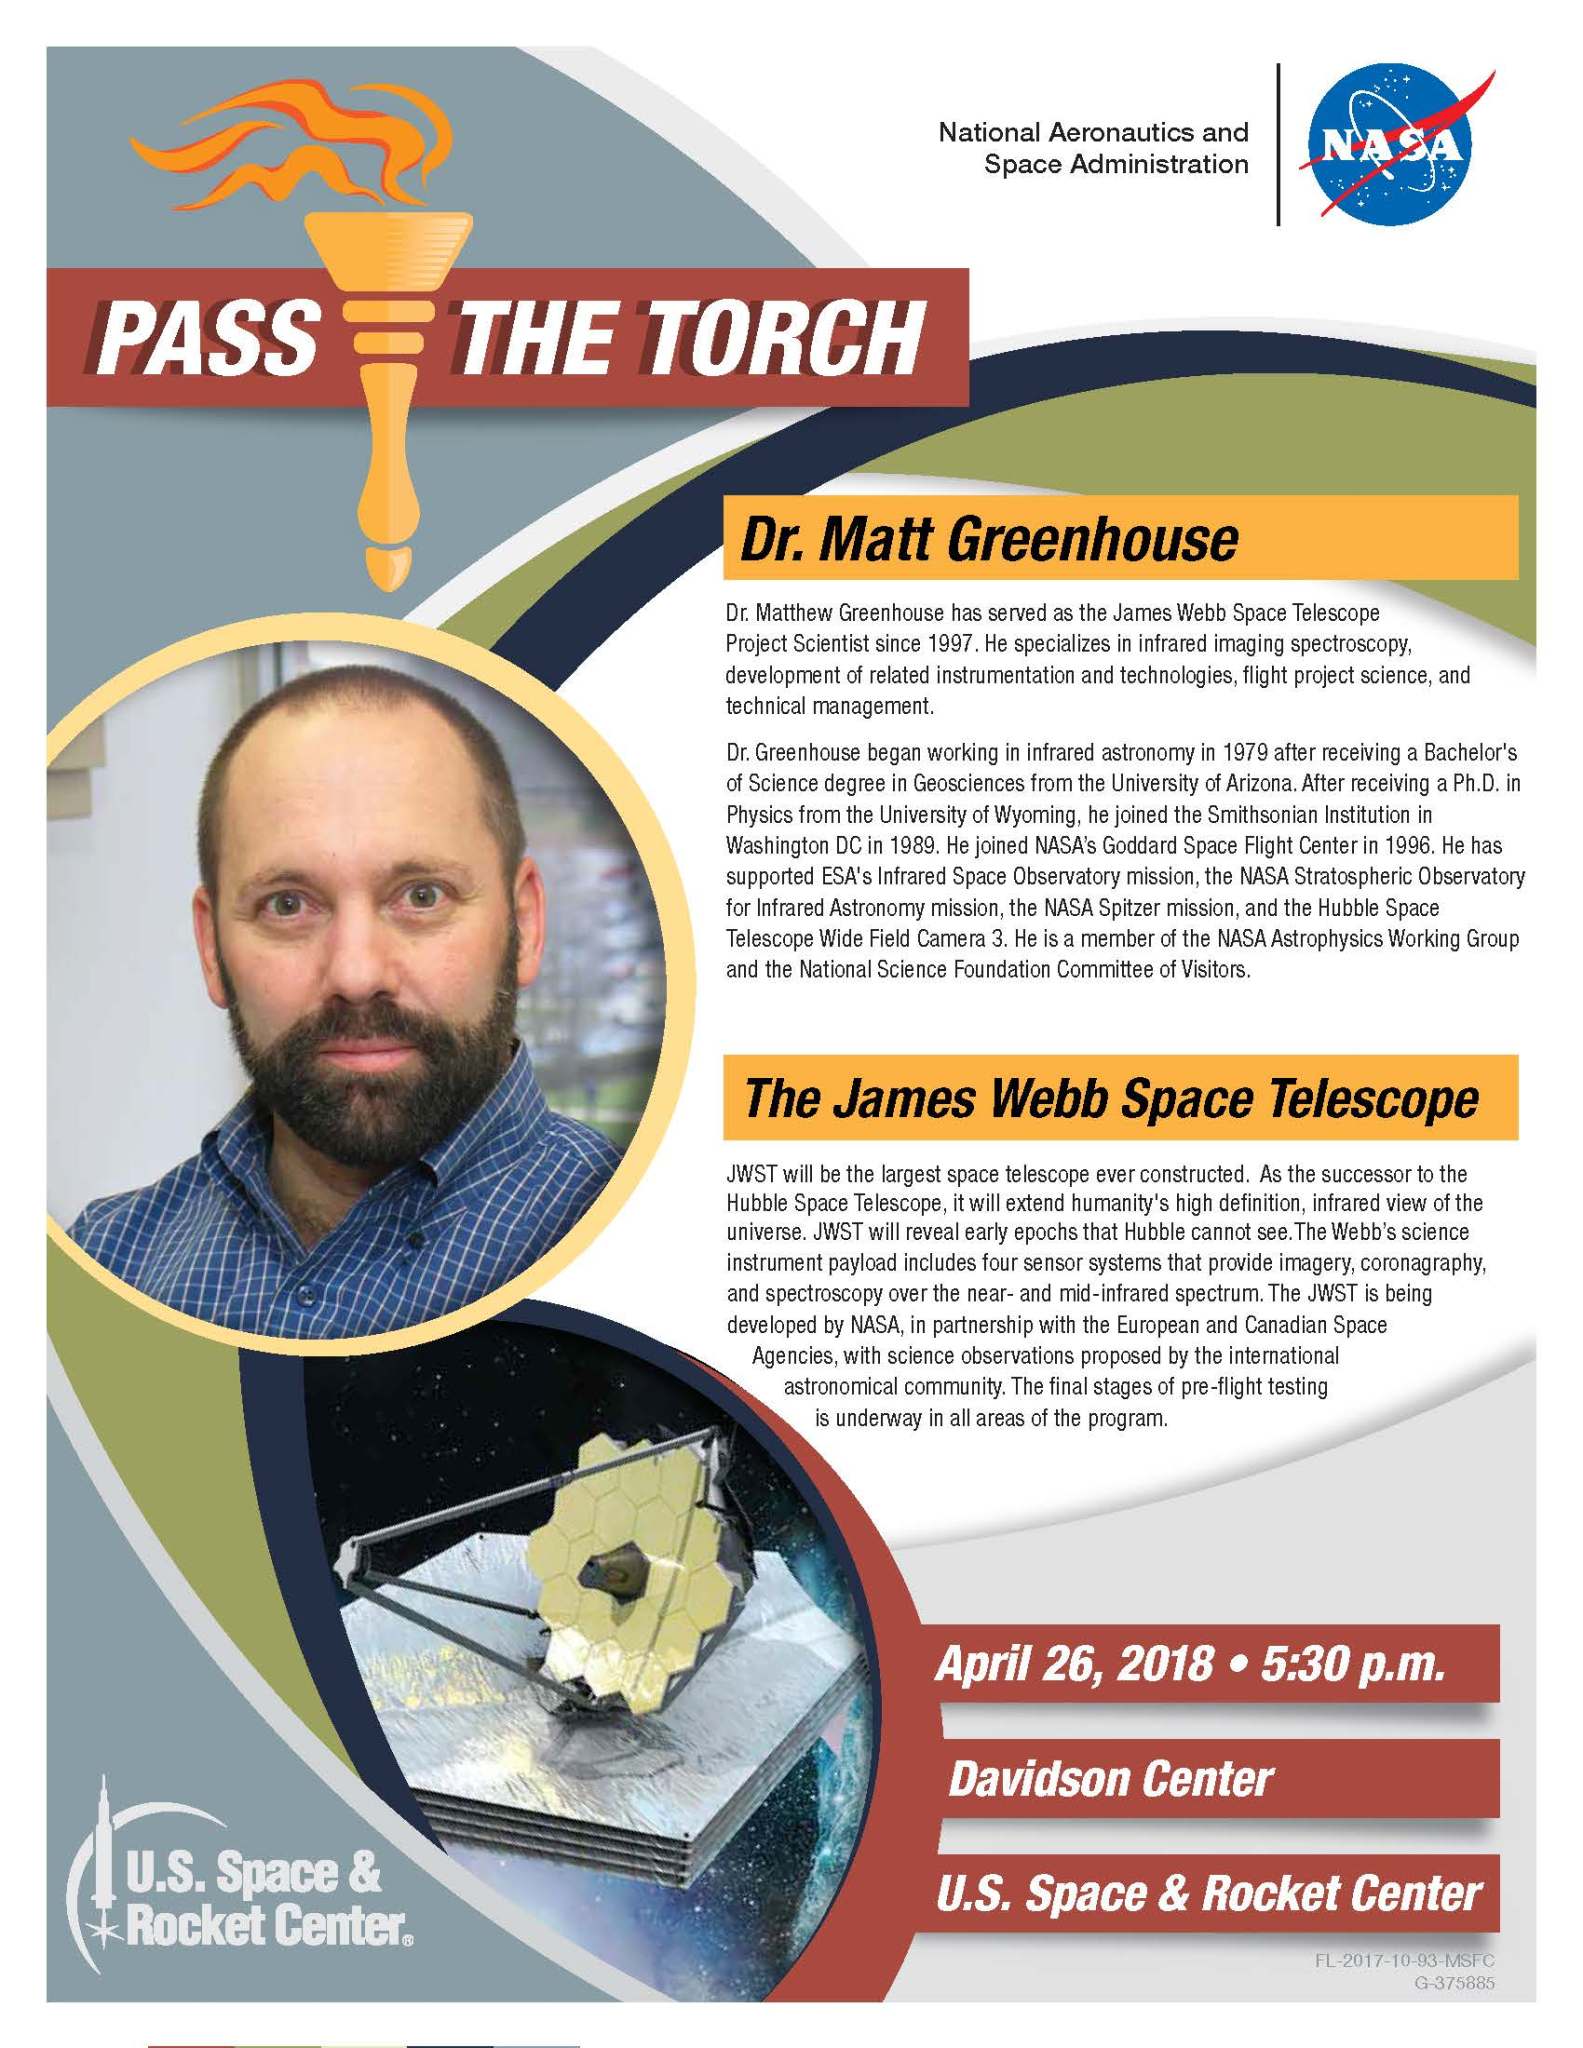 Marshall team members will have two opportunities to hear Matt Greenhouse speak April 26. 